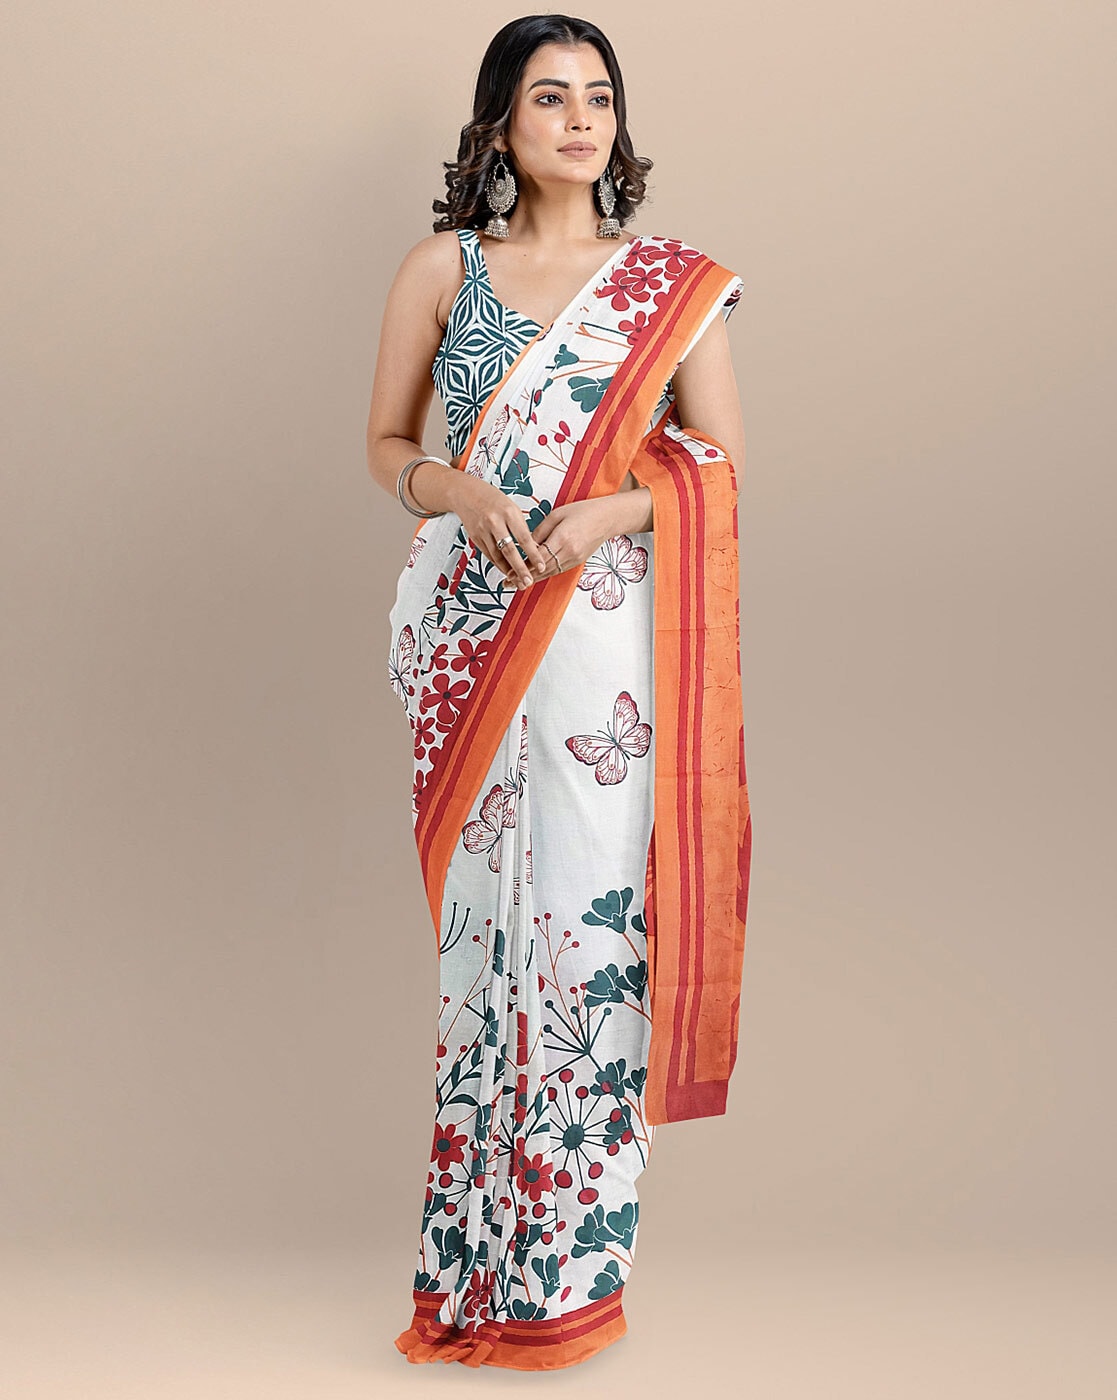 Buy Prawah Women Smooth Georgette Floral Print White Sarees With Unstitched  Blouse (White) at Amazon.in